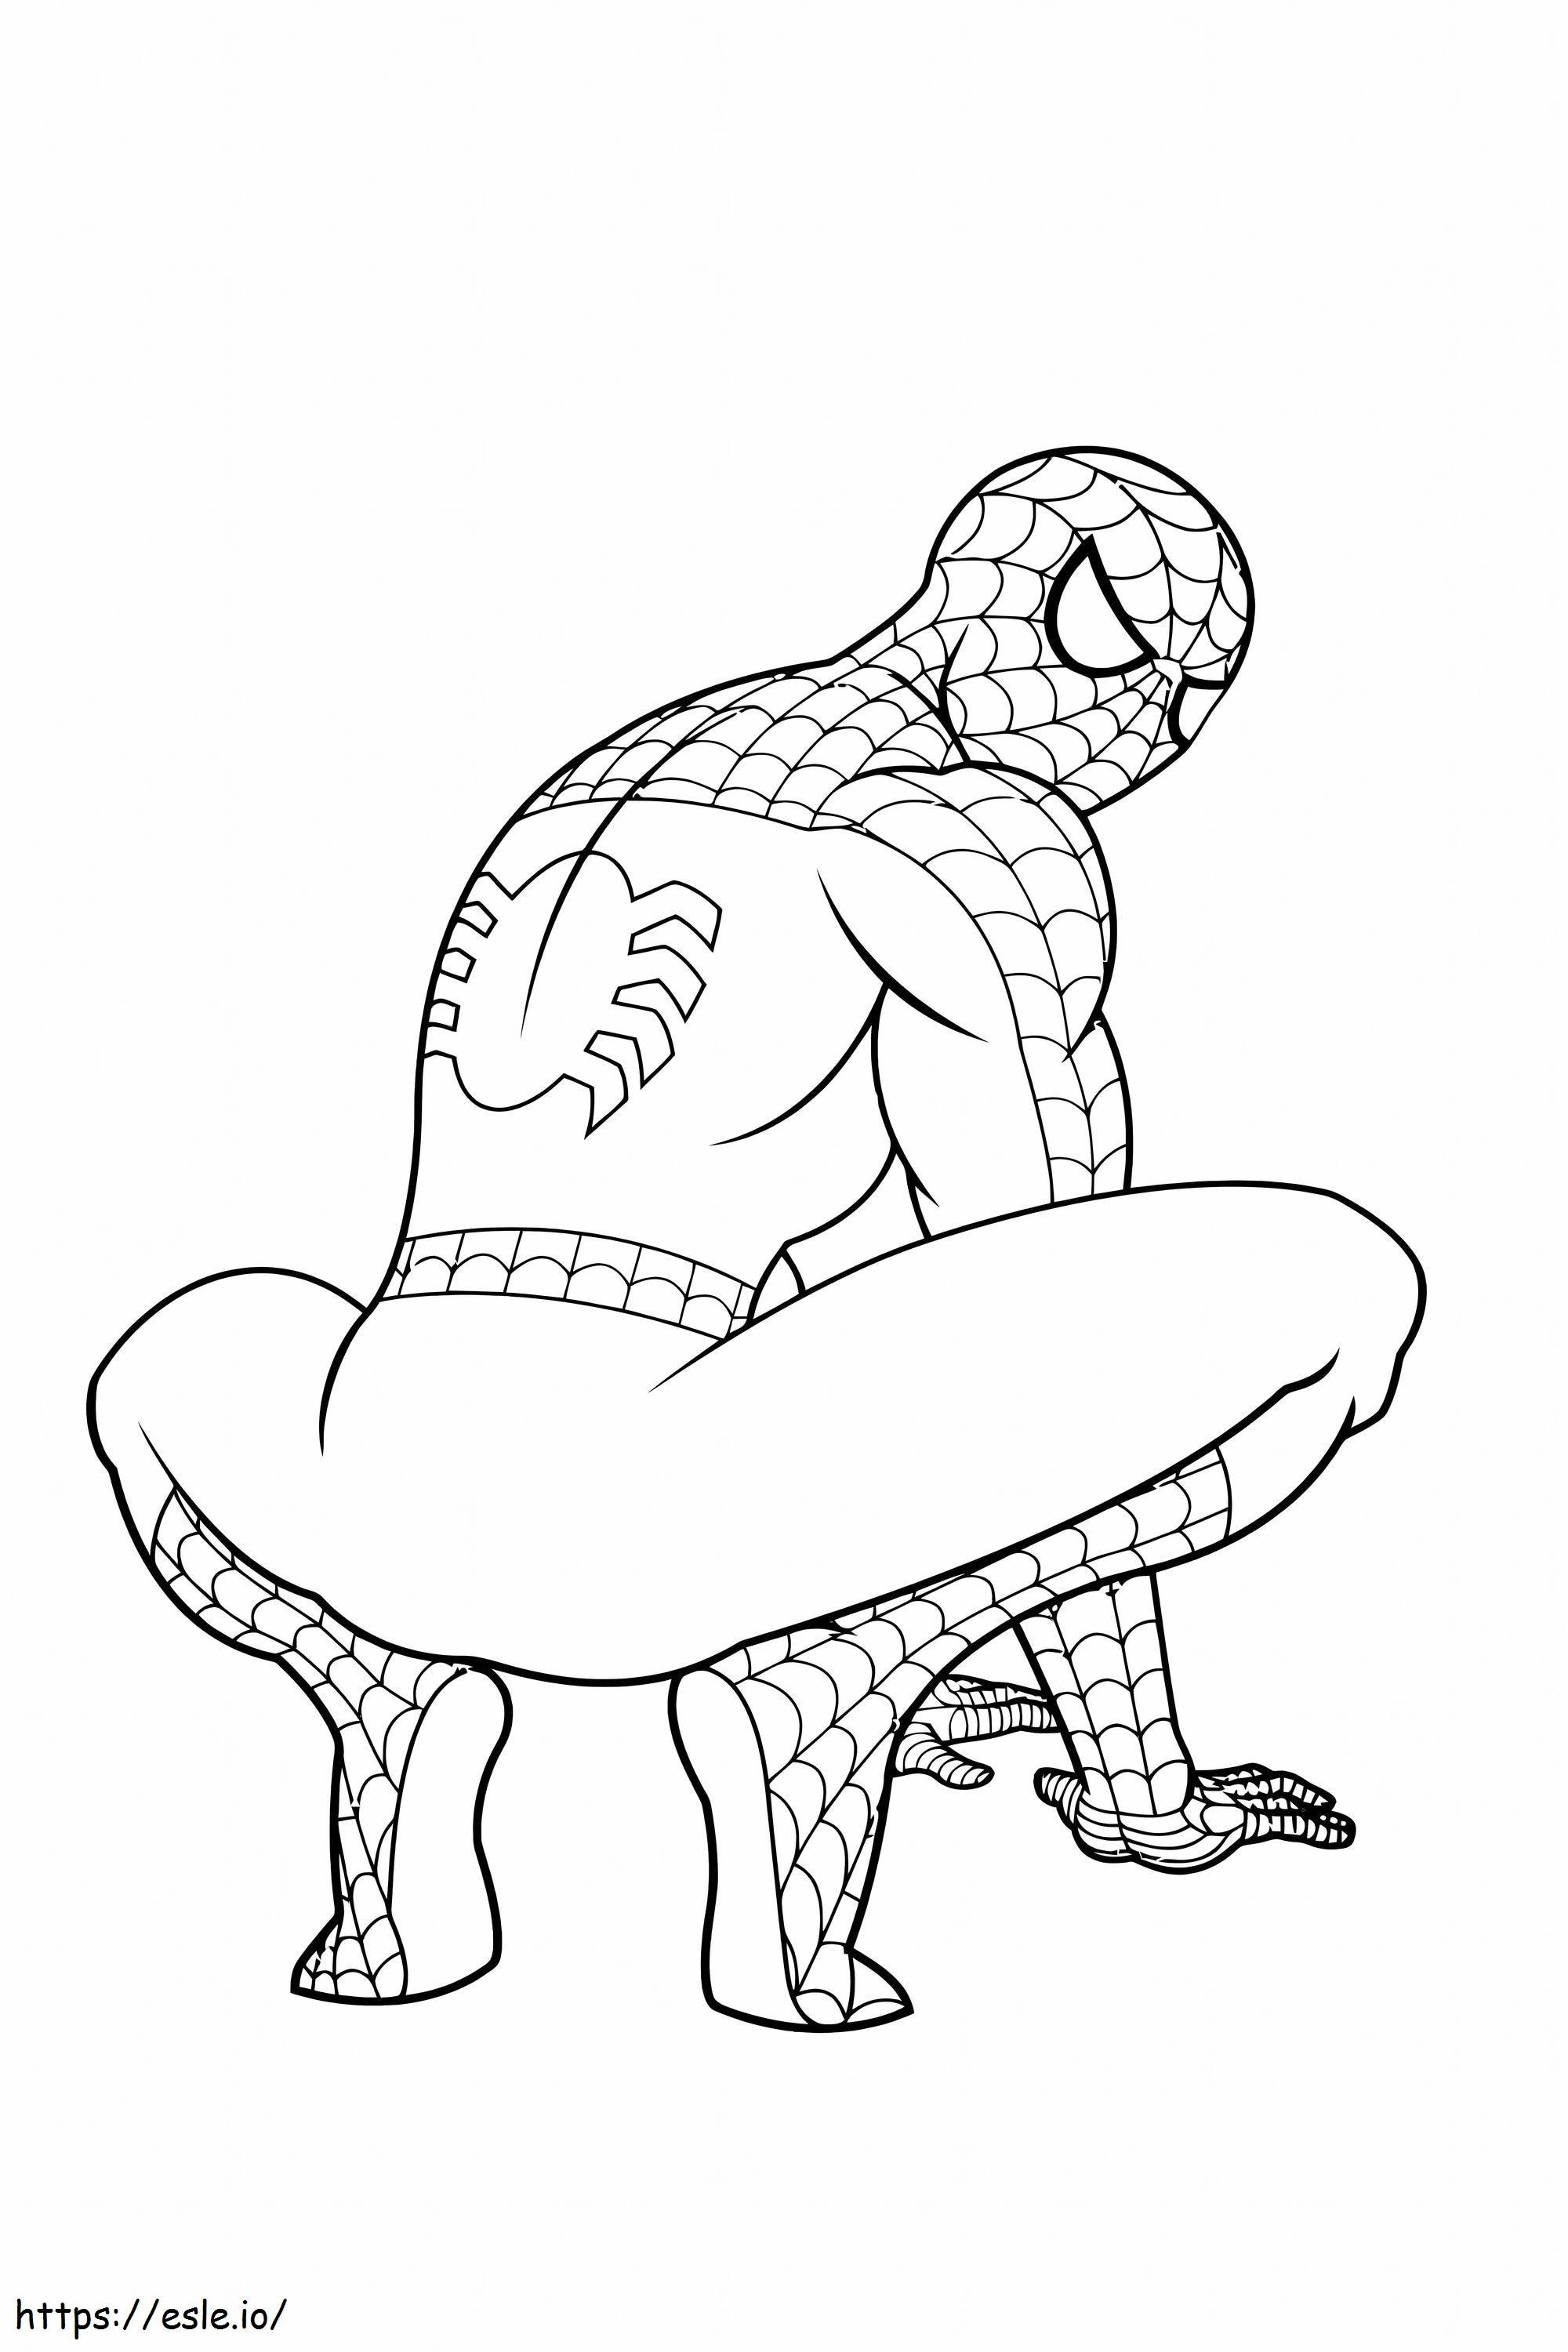 Funny Spider Man coloring page